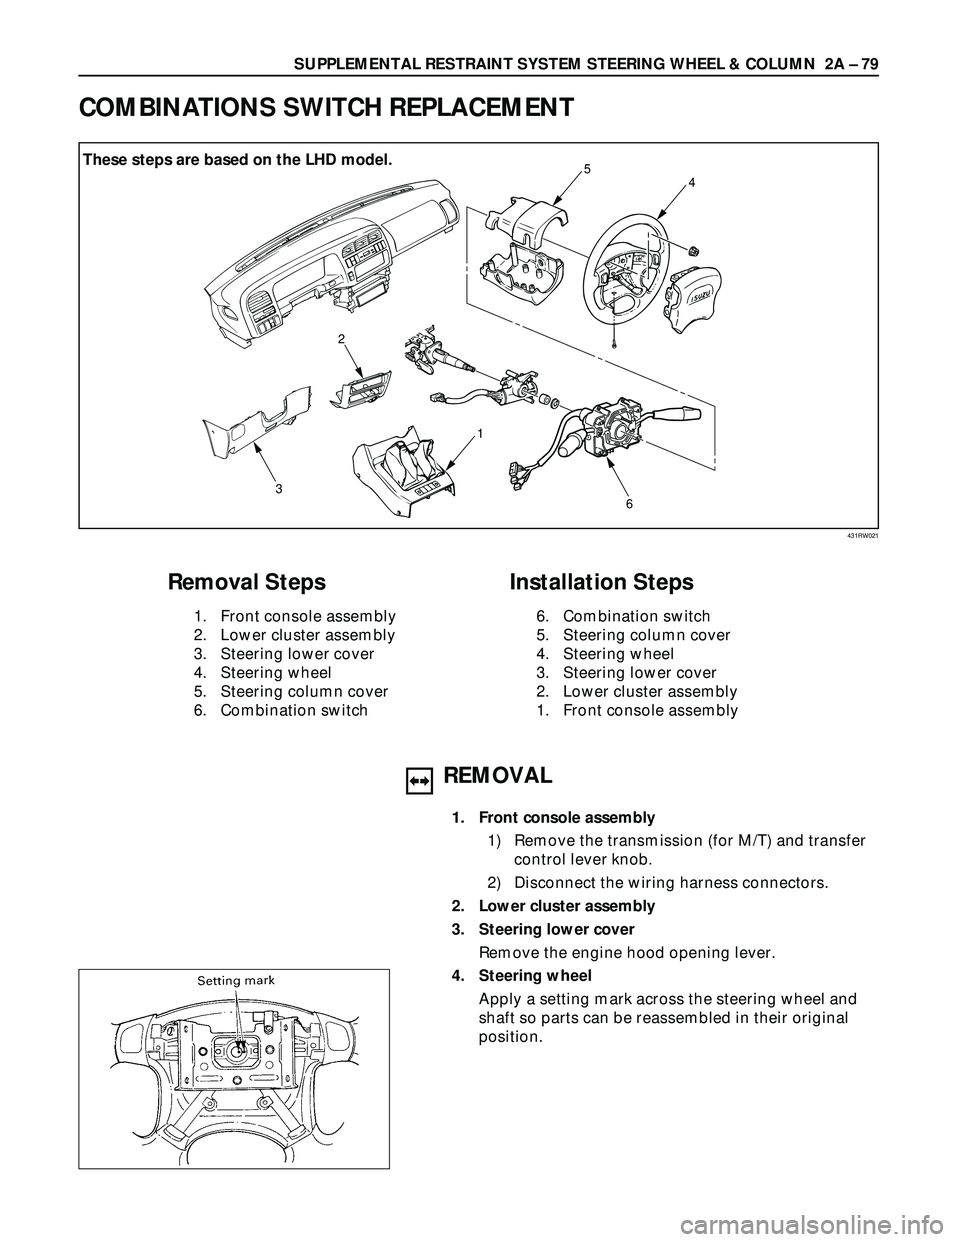 ISUZU TROOPER 1998  Service Repair Manual SUPPLEMENTAL RESTRAINT SYSTEM STEERING WHEEL & COLUMN  2A – 79
4
1 2
6
3
5 These steps are based on the LHD model.
Removal Steps
1. Front console assembly
2. Lower cluster assembly
3. Steering lower